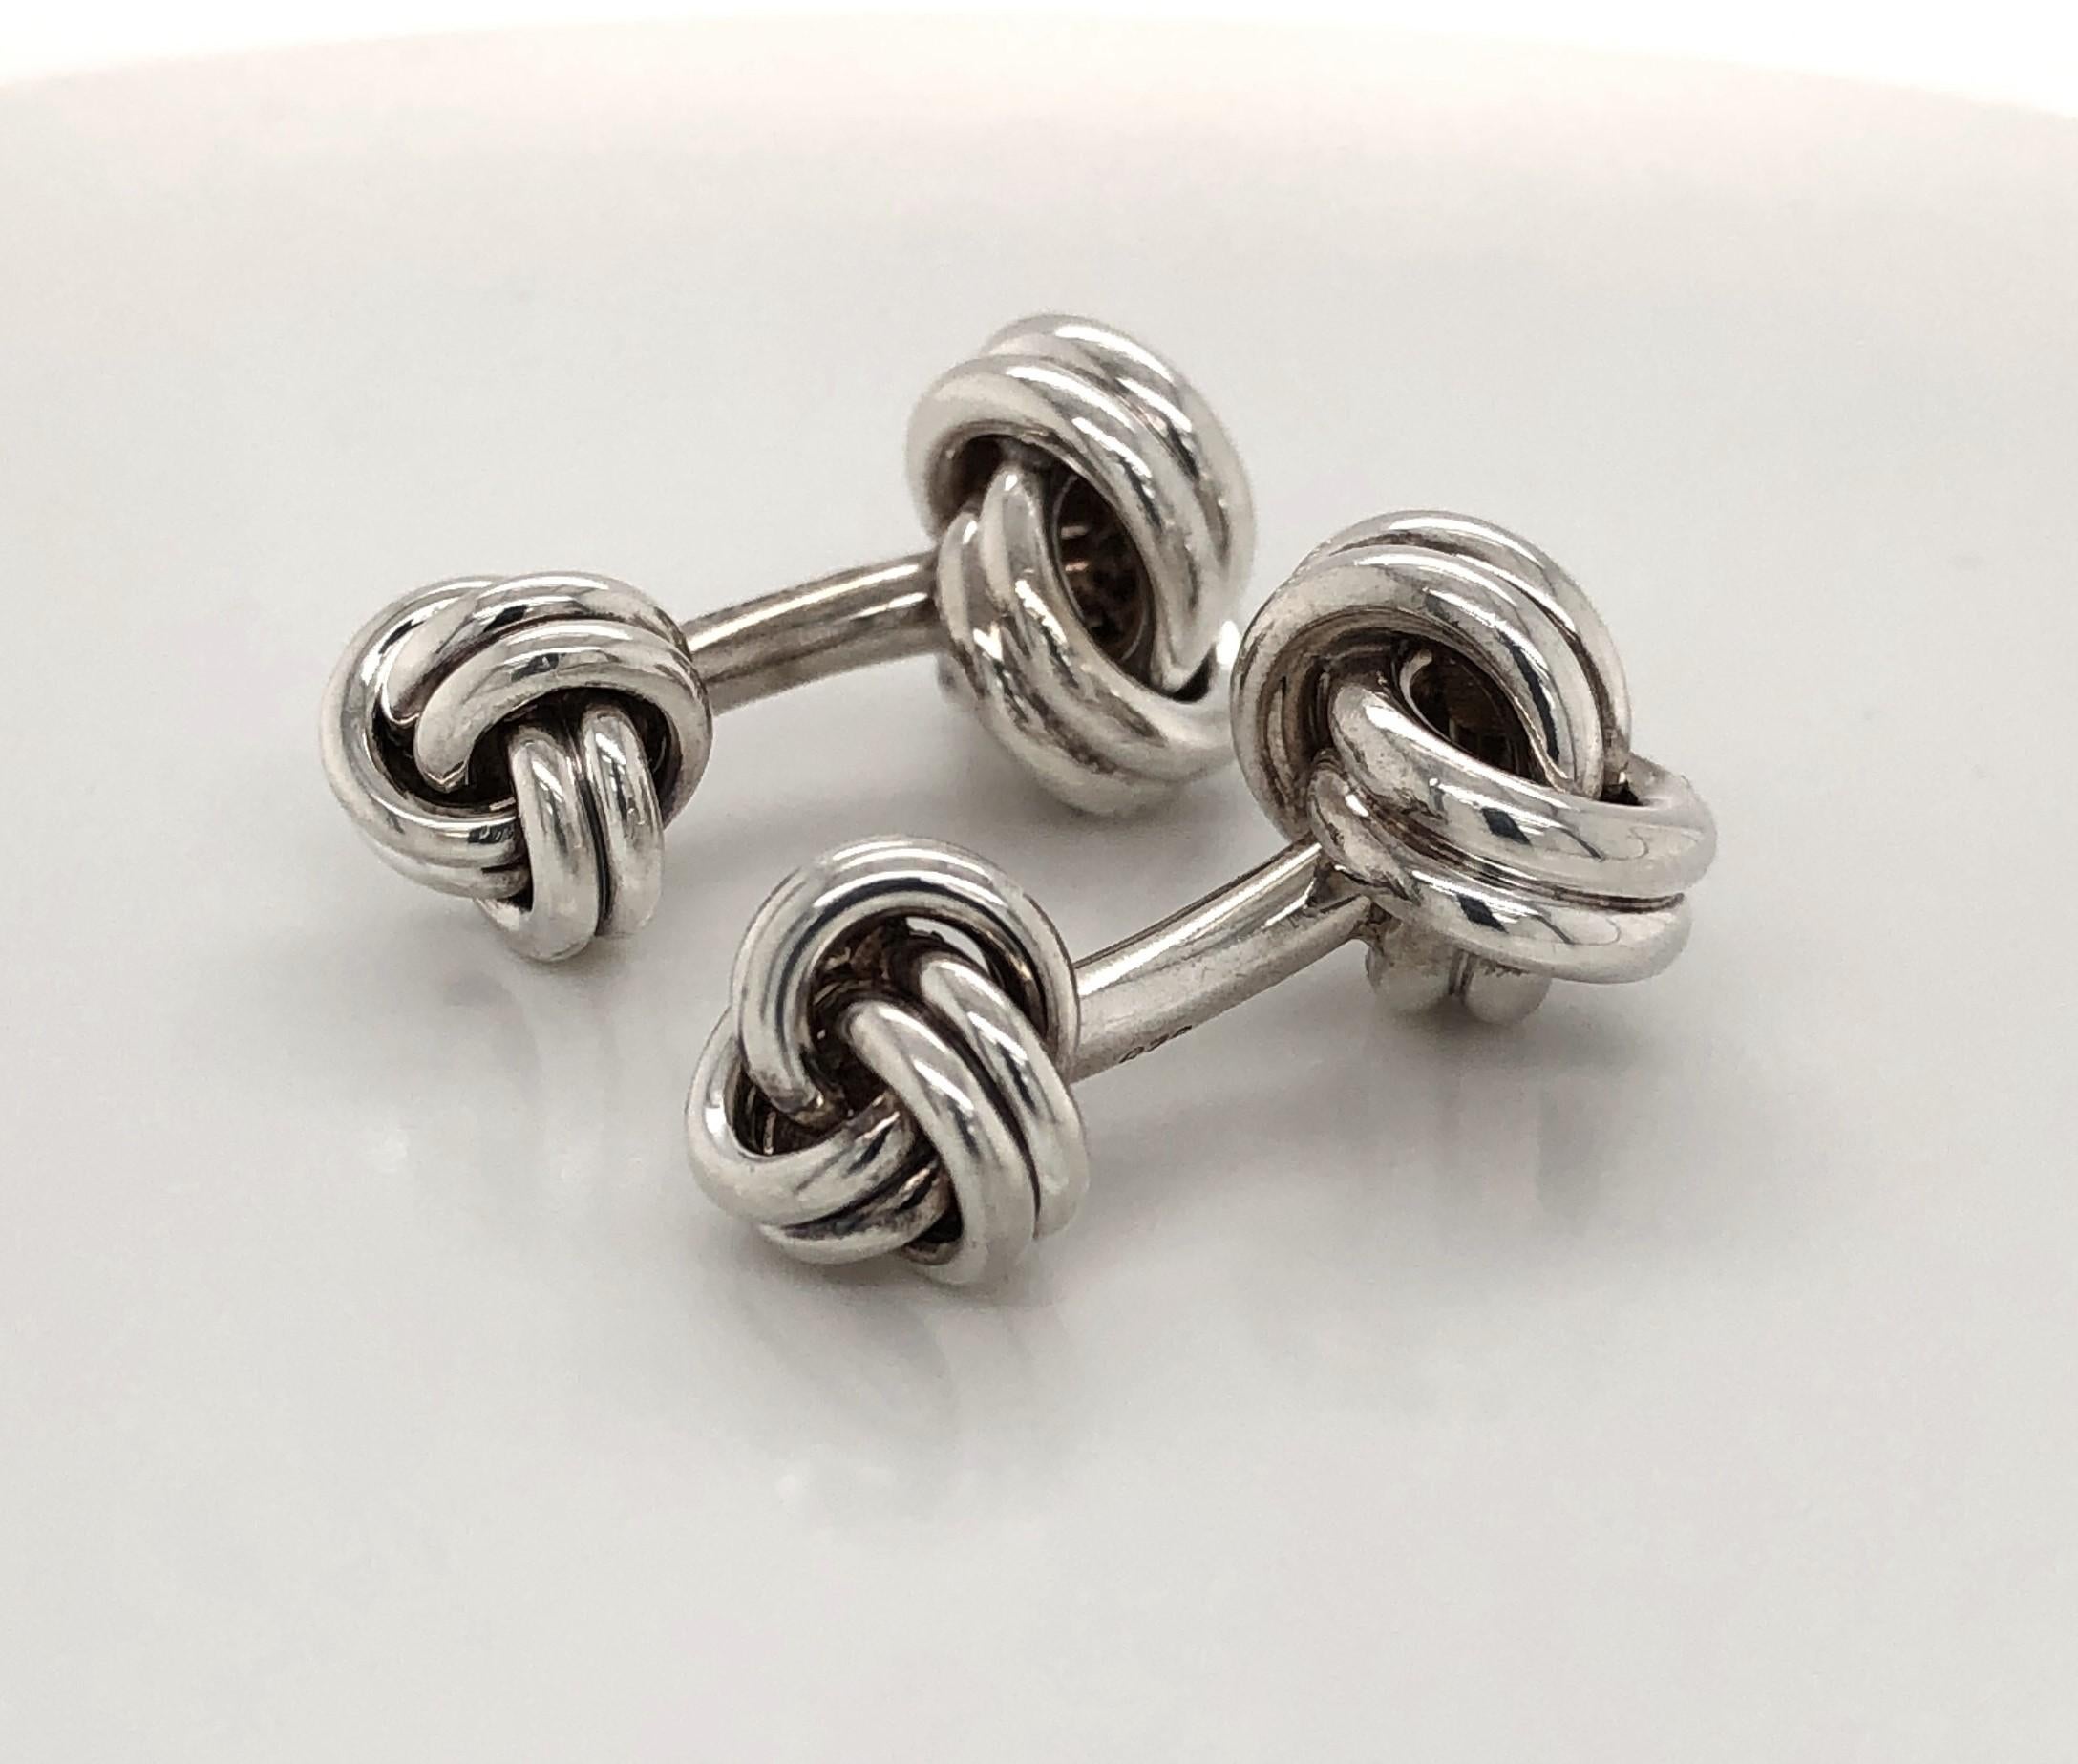 Tiffany Sterling Silver Double Knot Cuff Links. Reversible, fixed back style. Larger knot measures approx 12.25 mm x 12.75 mm. The smaller knot measures approximately 8.5 mm x 10.5 mm. Signed by maker. In gift box.